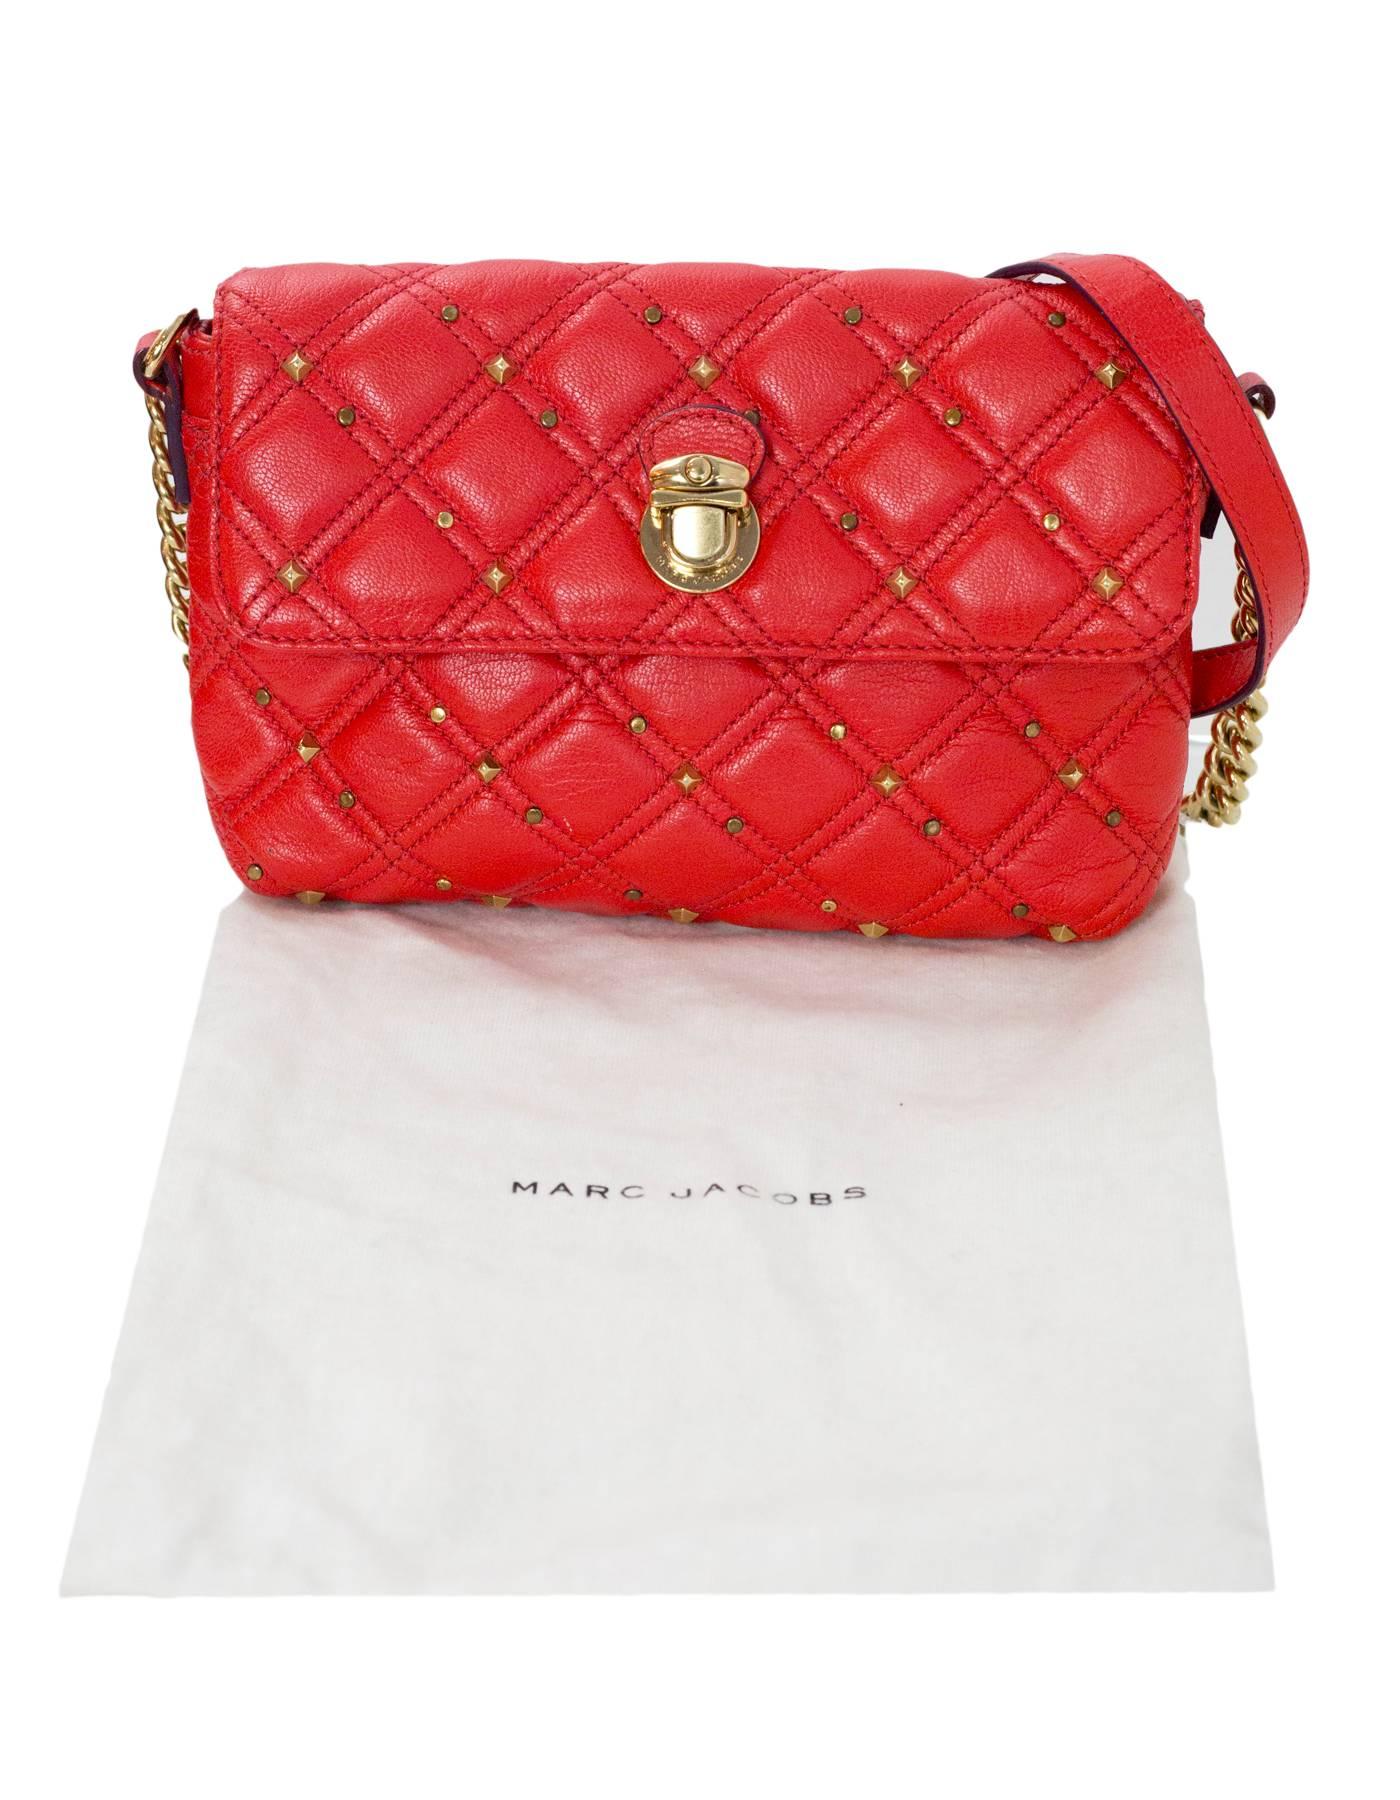 Marc Jacobs Red Leather Studded Crossbody Bag with DB 5